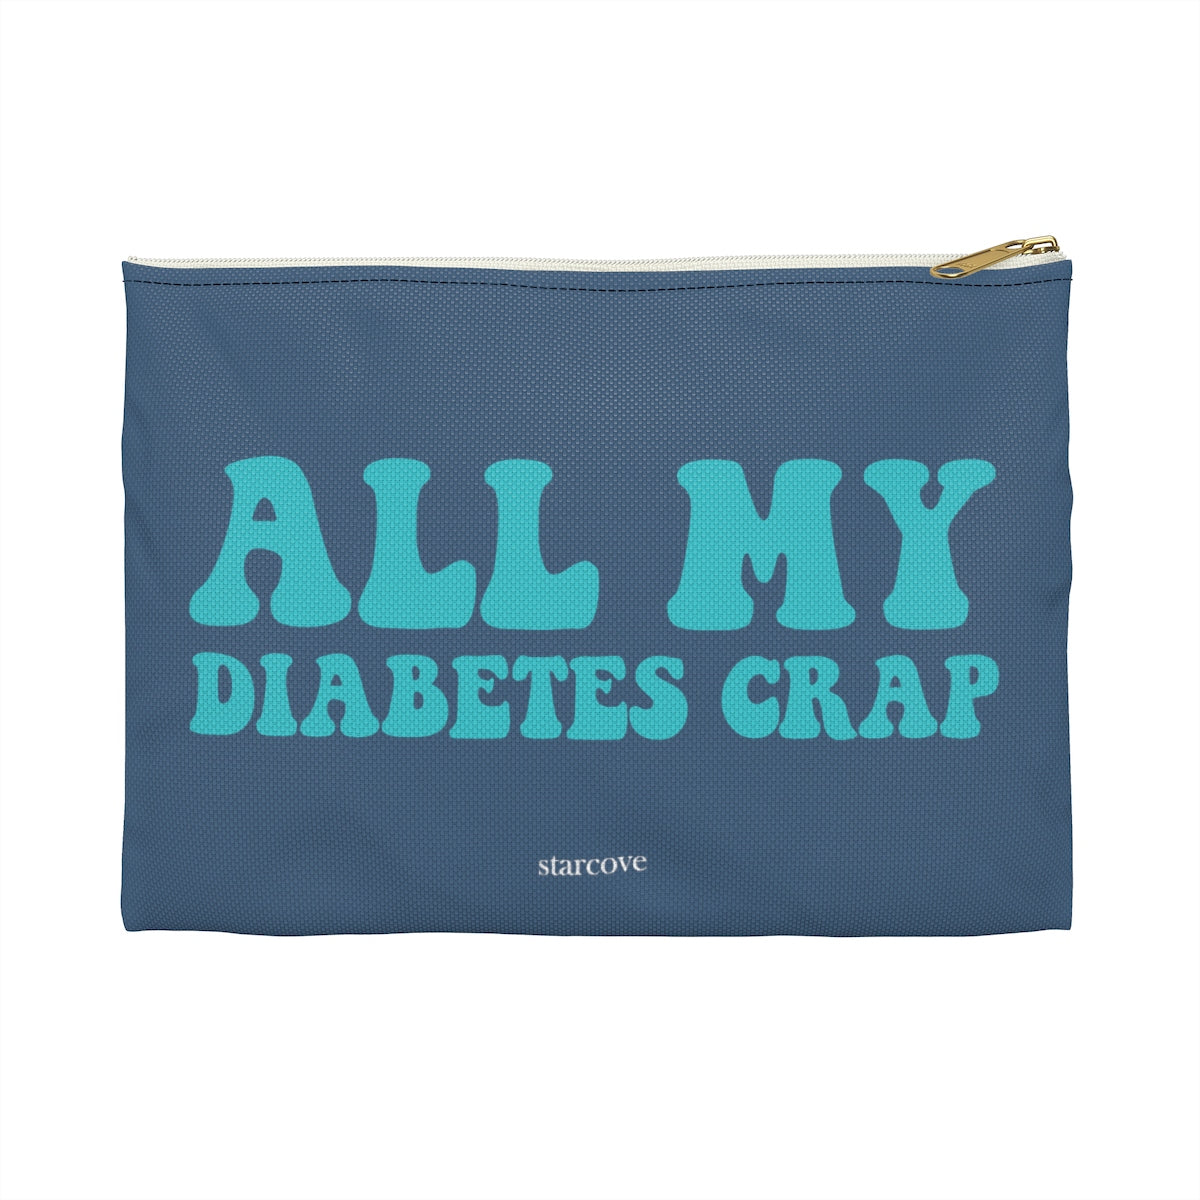 All My Diabetes Crap, Funny Diabetic Supply Travel Bag Zipper Pouch, Gift for Her Him Type 1 Accessory Starcove Fashion